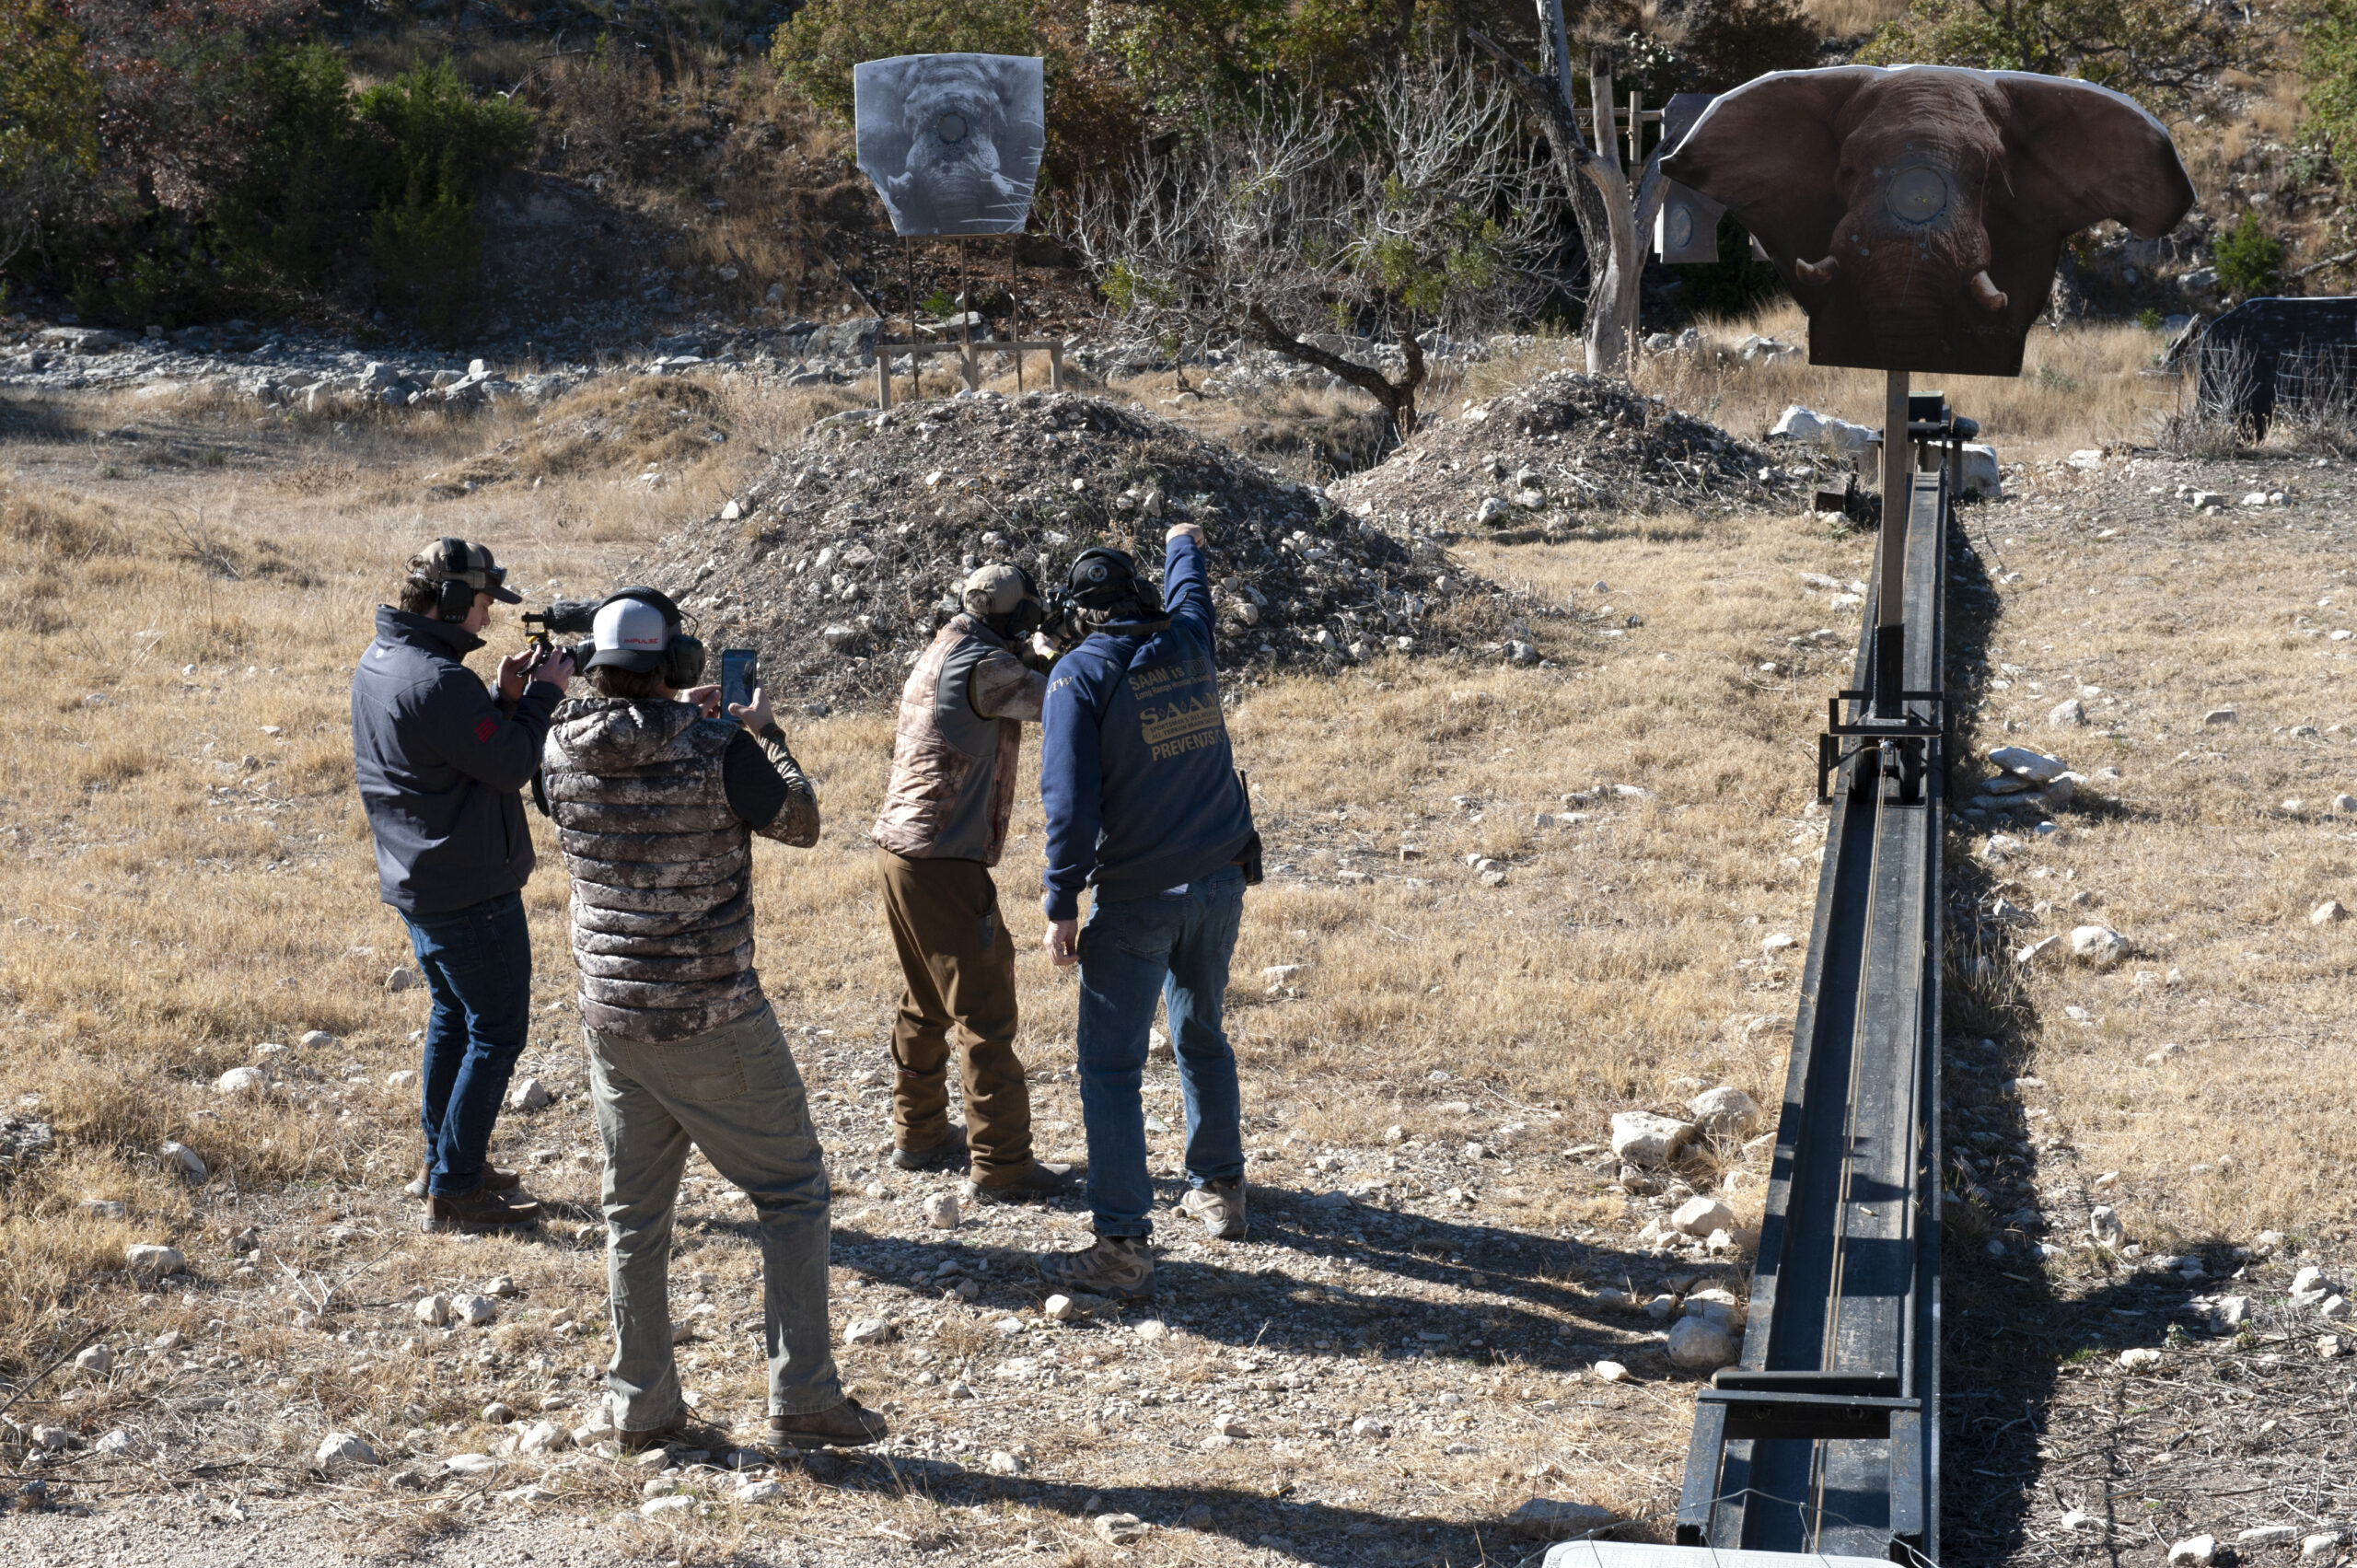 A hunter practices on a charging elephant target with an instructor and two videographers.